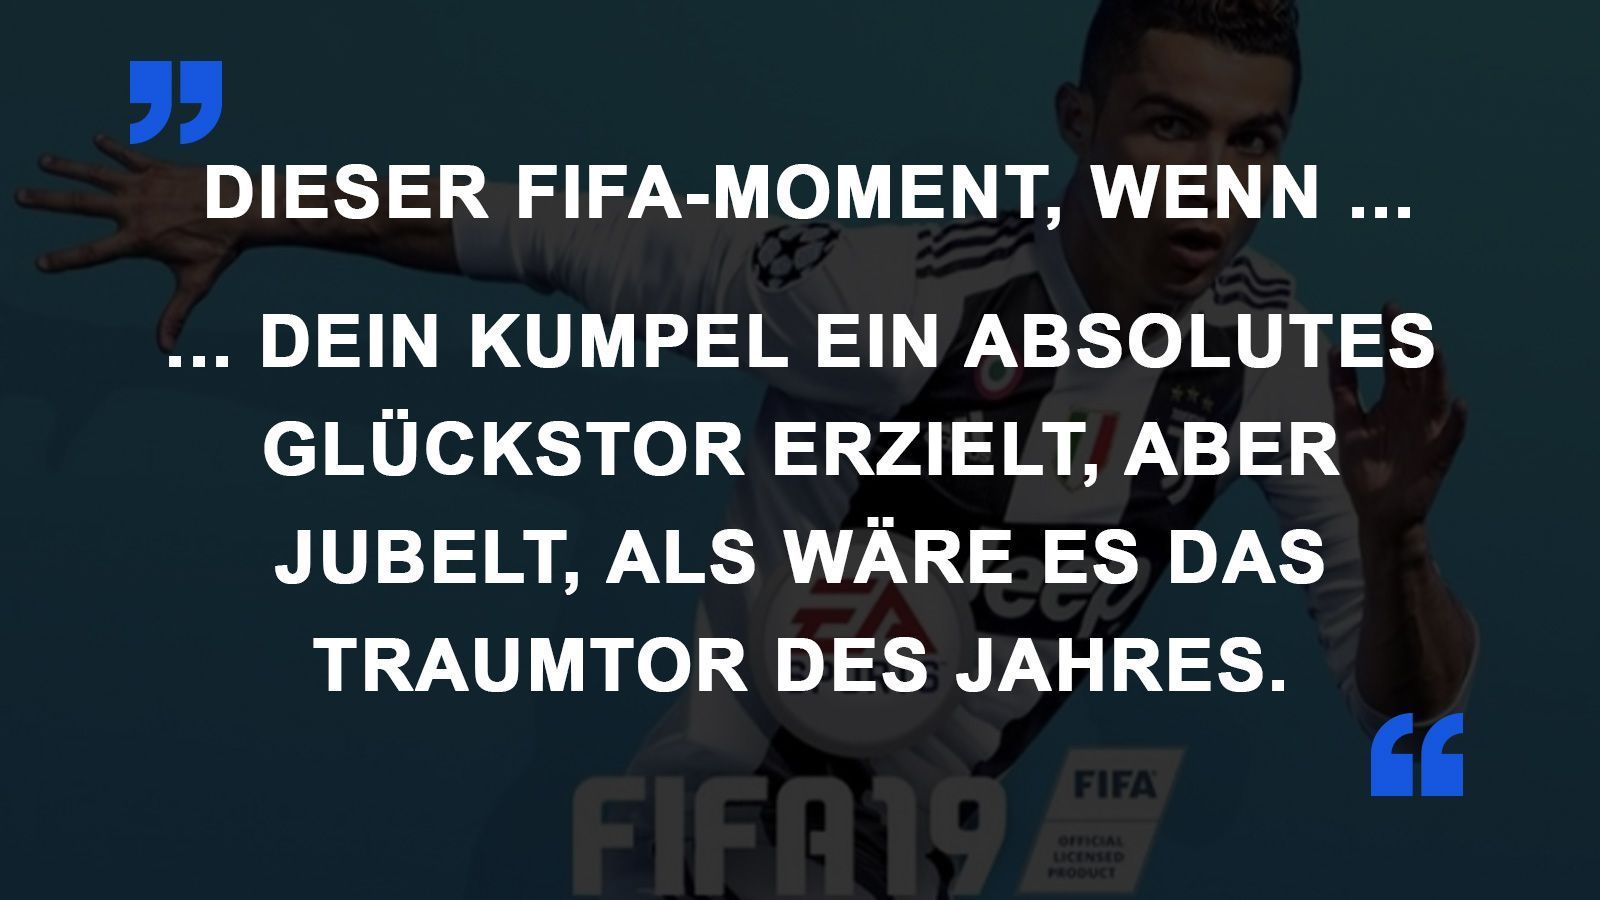 
                <strong>FIFA Momente Traumtor des Jahres</strong><br>
                
              